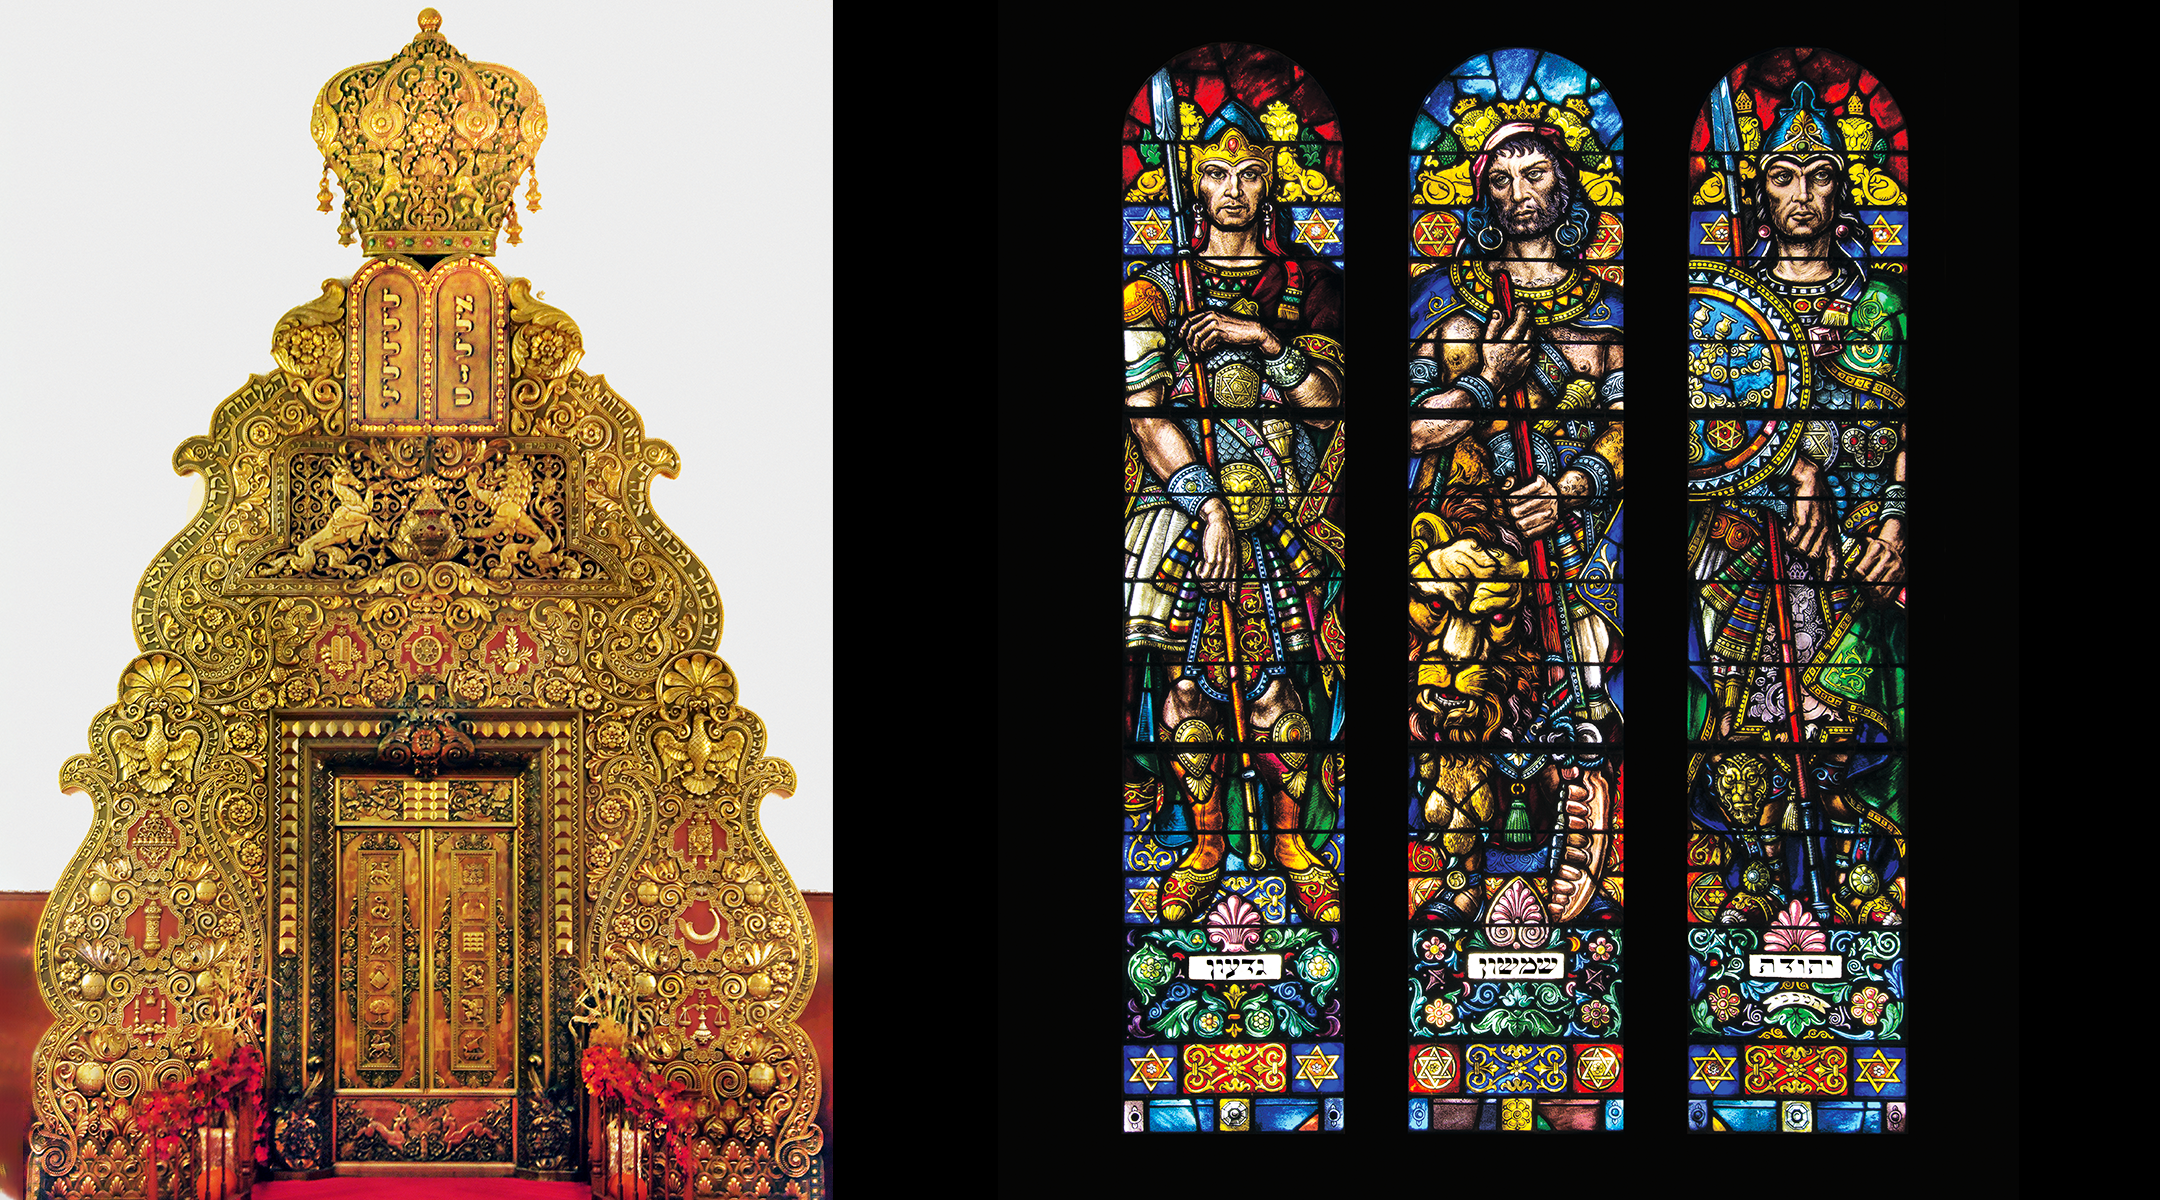 The baroque form of Szyk’s ark at the Forest Hills Jewish Center, left, is reminiscent of the arks of Eastern European synagogues that were destroyed in the war; Szyk’s stained glass “Warrior Windows” at Cleveland’s Reform Temple Tifereth Israel feature the biblical figures Gideon, Samson and Judah Maccabee. (Courtesy of Irvin Ungar)